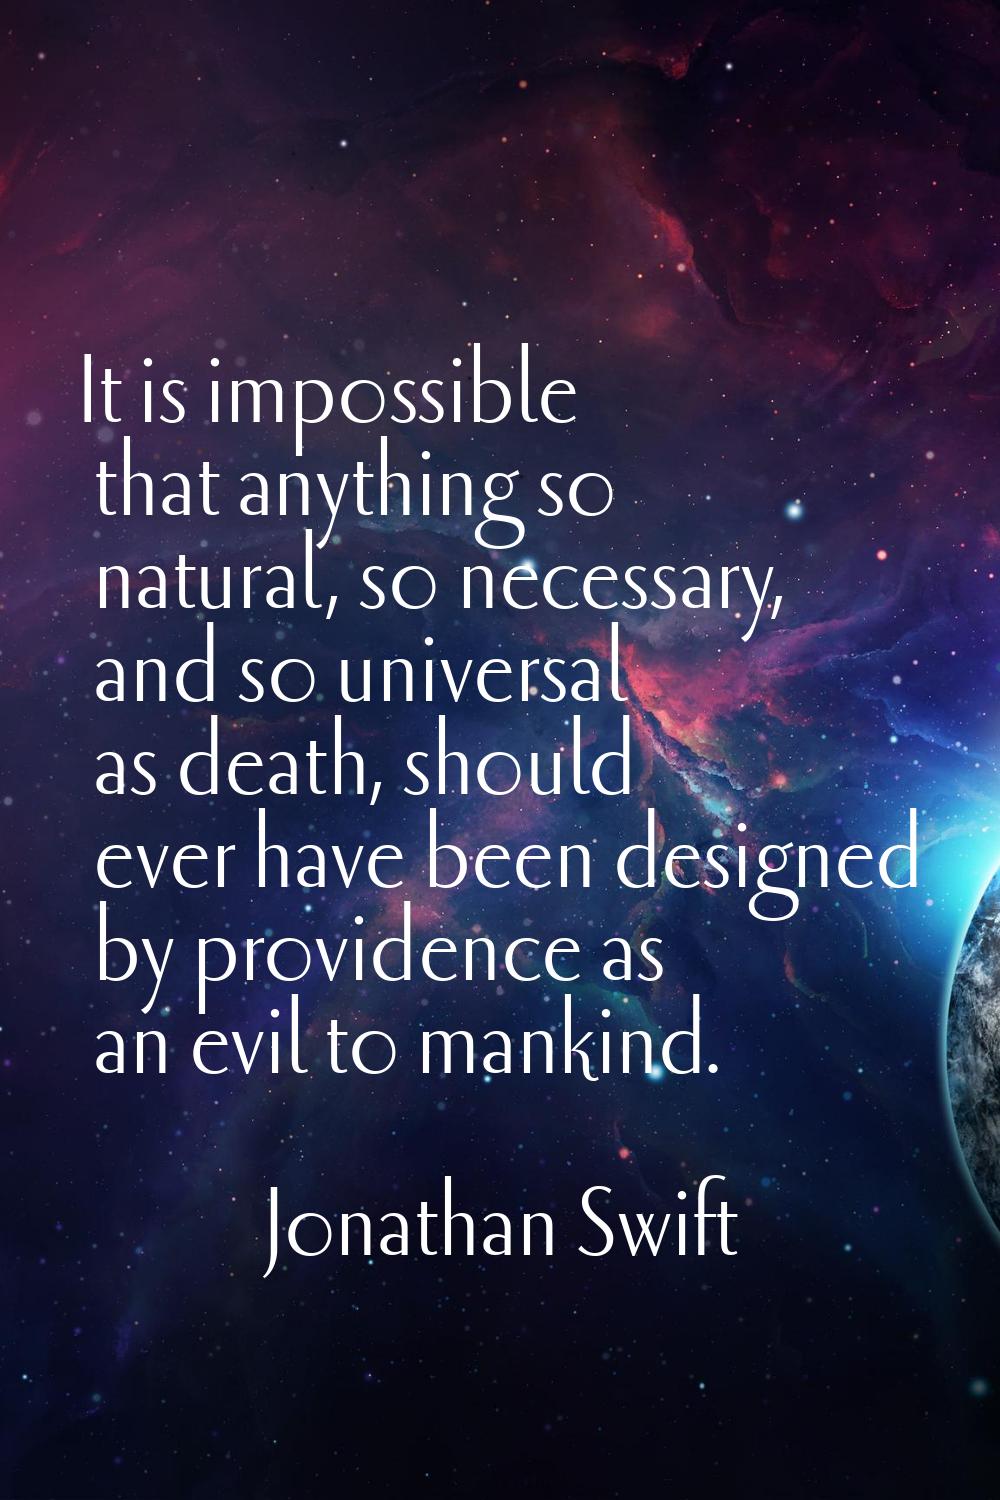 It is impossible that anything so natural, so necessary, and so universal as death, should ever hav